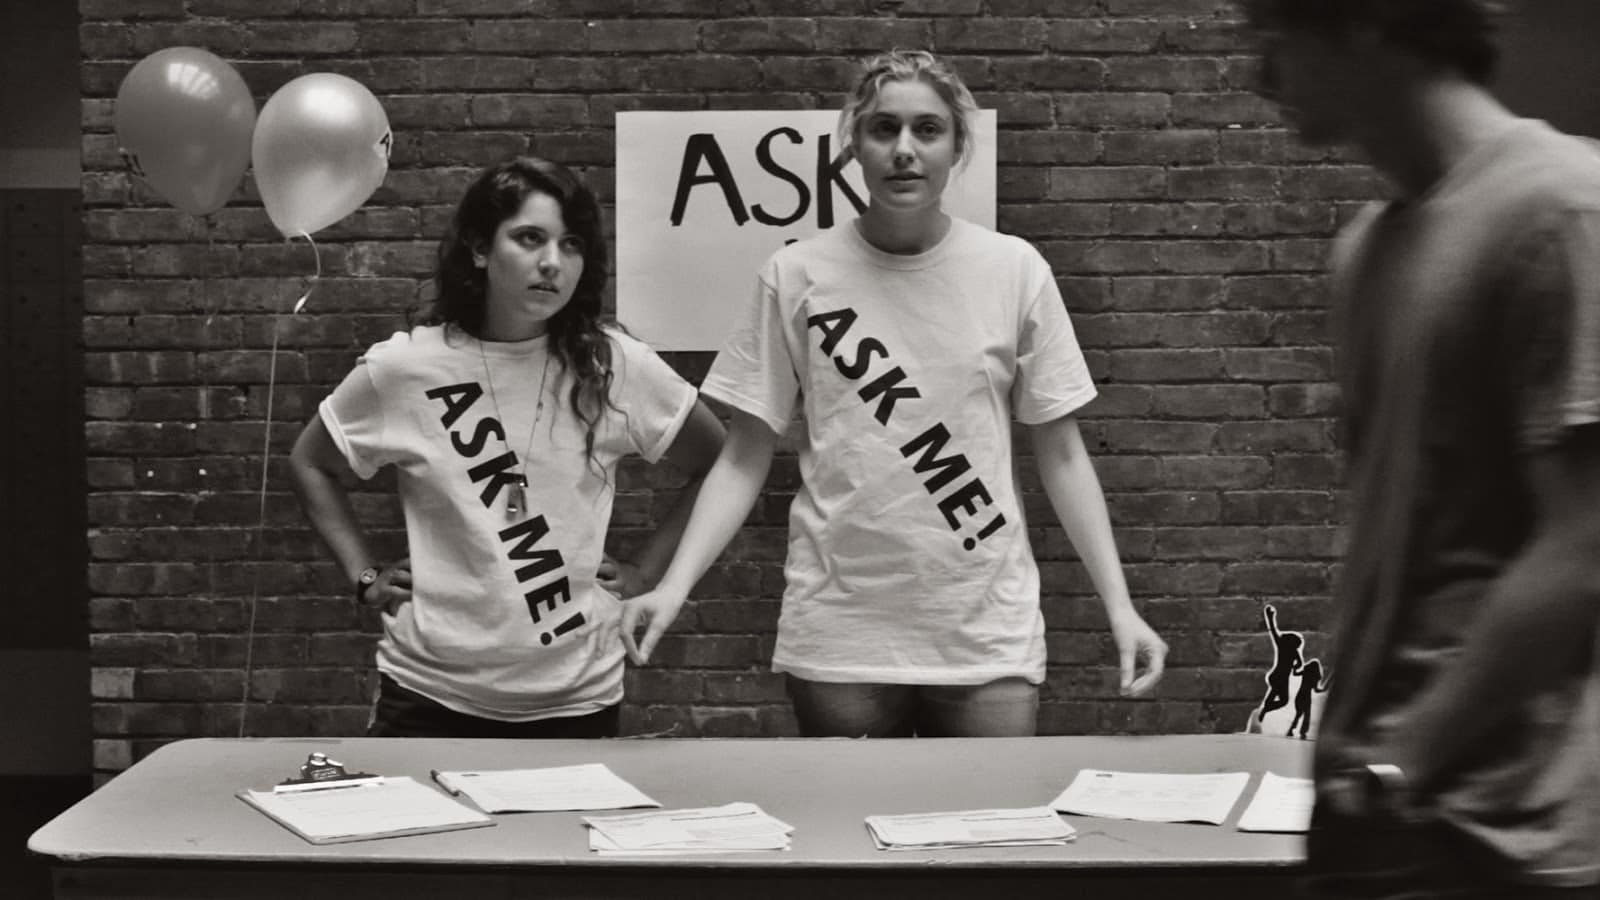 The Most Important Movie In The World: Frances Ha "Greta Gerwig with coworker at university open house wearing "ask me" t-shirt